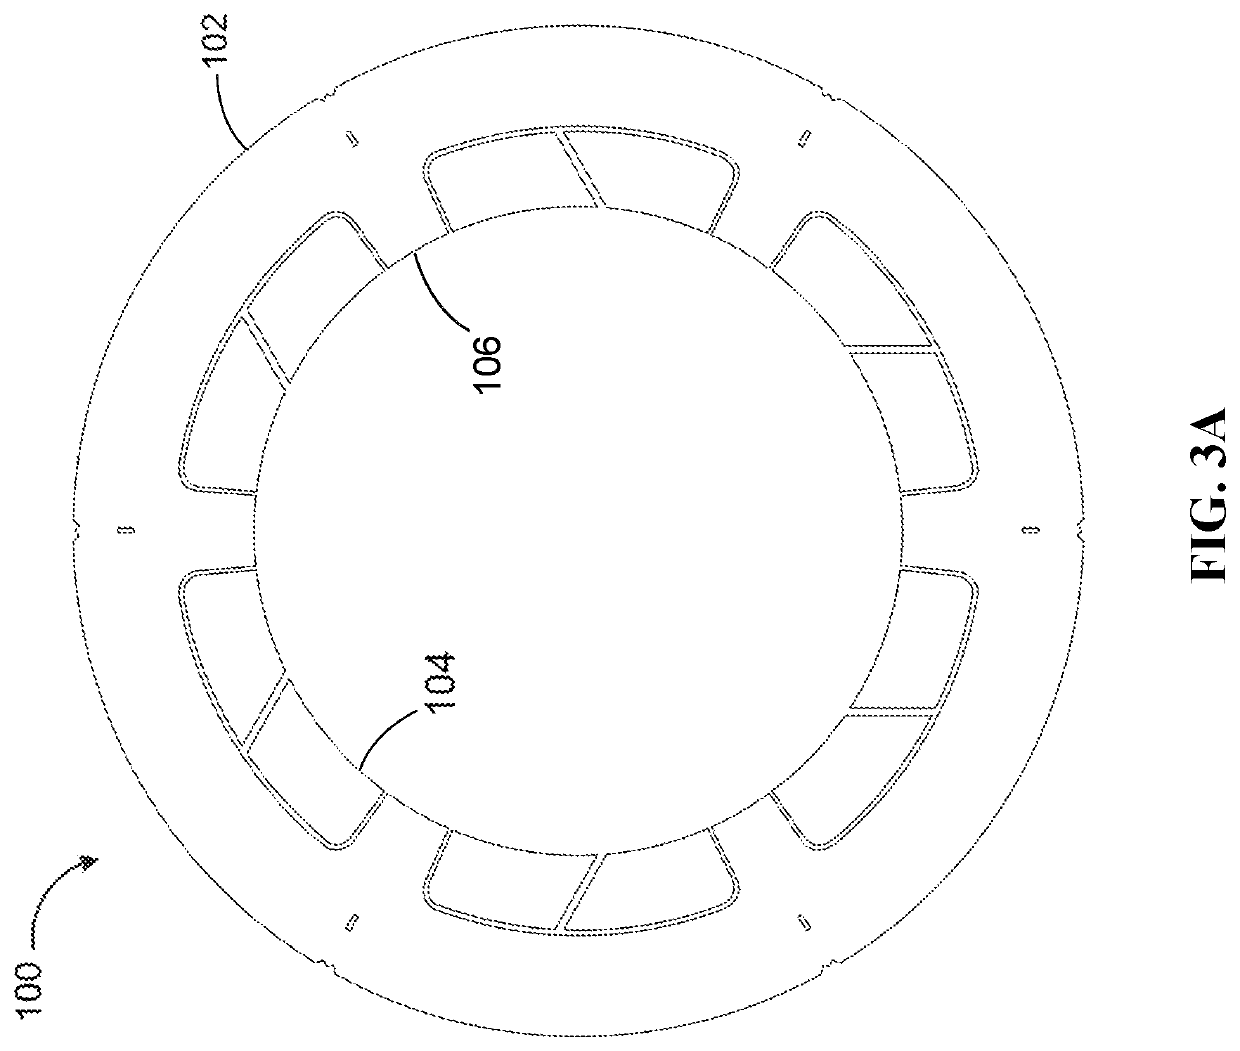 Shaped stator windings for a switched reluctance machine and method of making the same